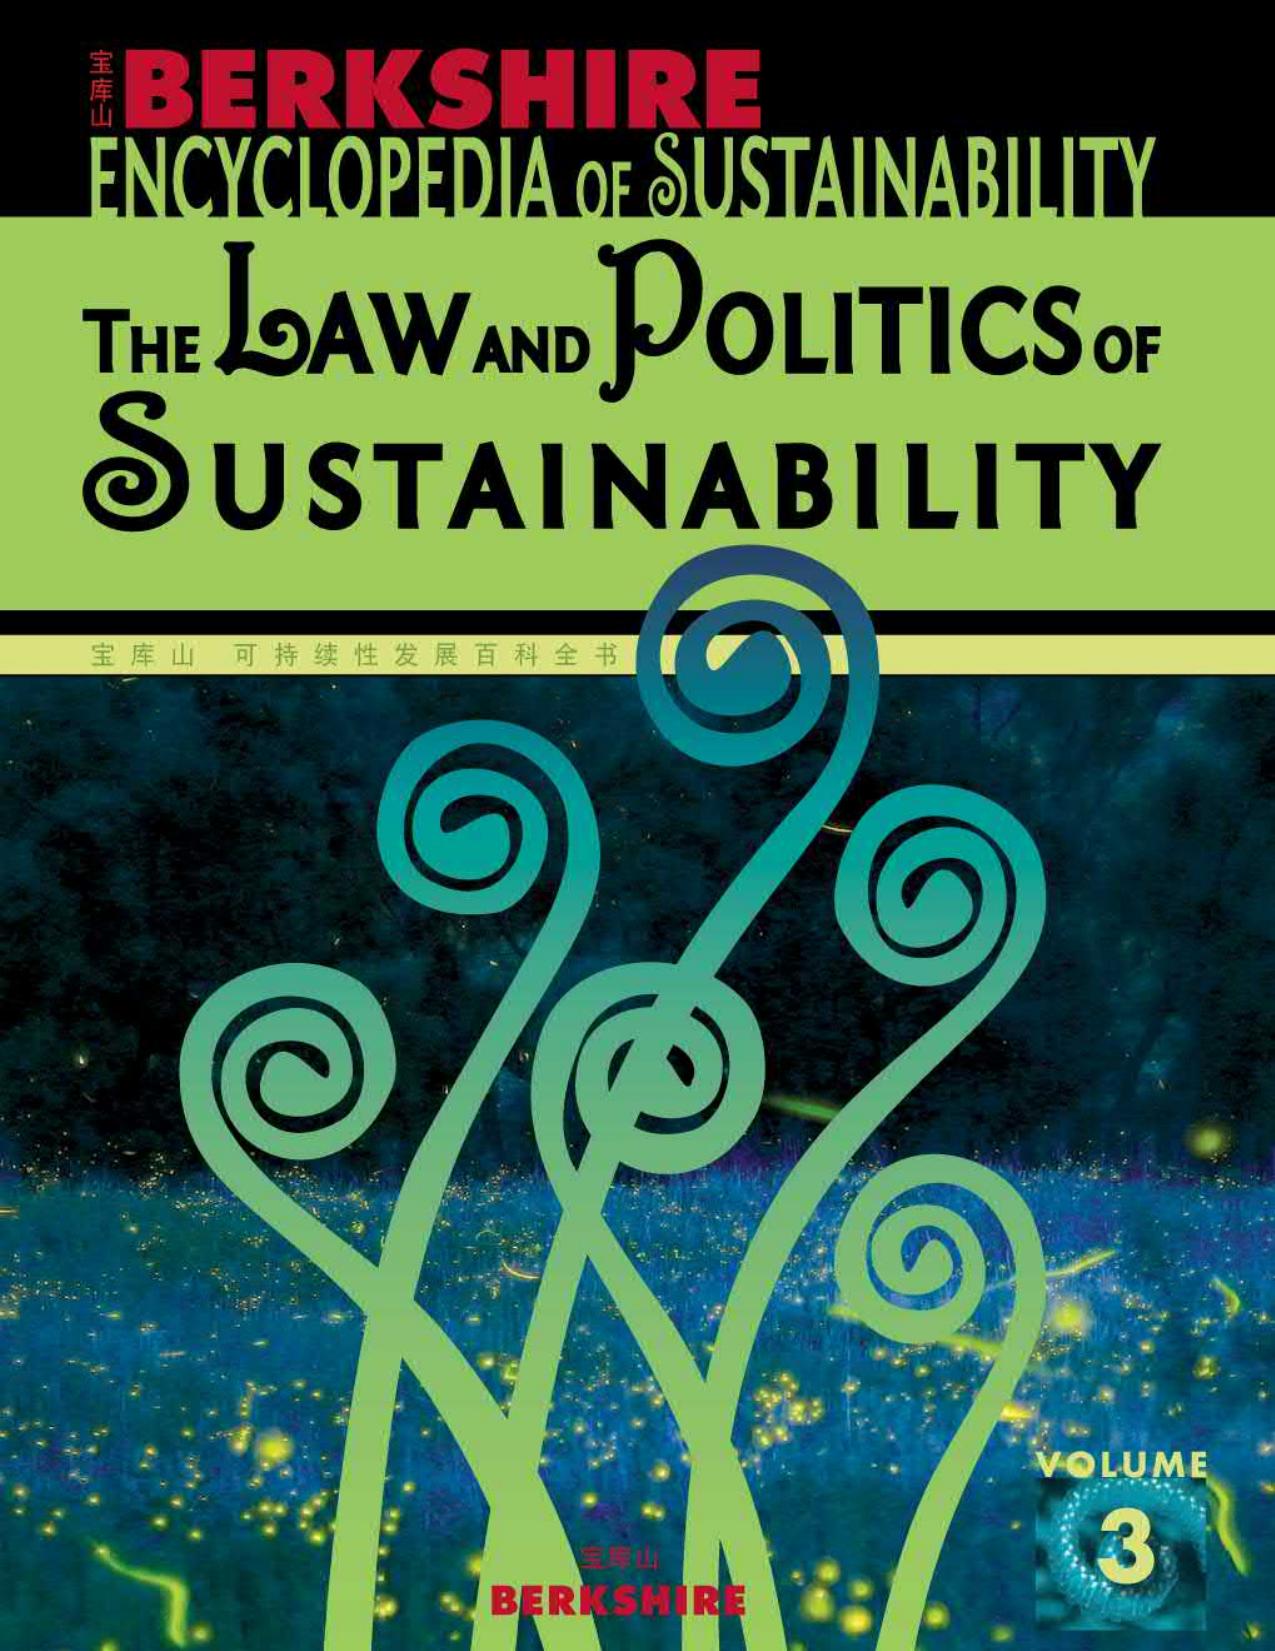 Berkshire Encyclopedia of Sustainability 3/10: The Law and Politics of Sustainability